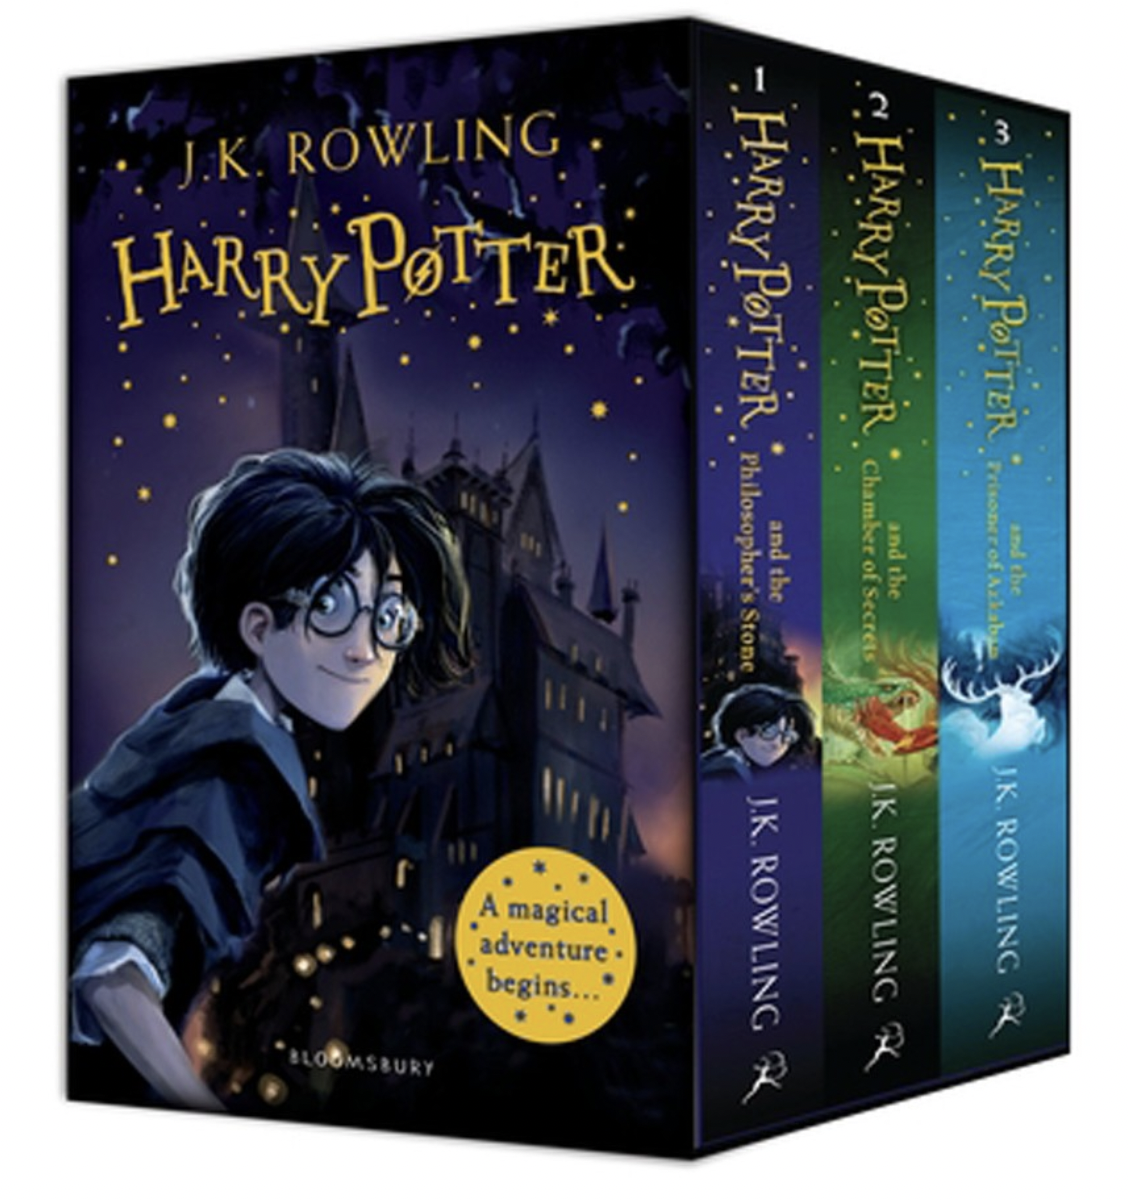 Harry Potter Harry Potter 1-3 Box Set: A Magical Adventure Begins by J.K. Rowling